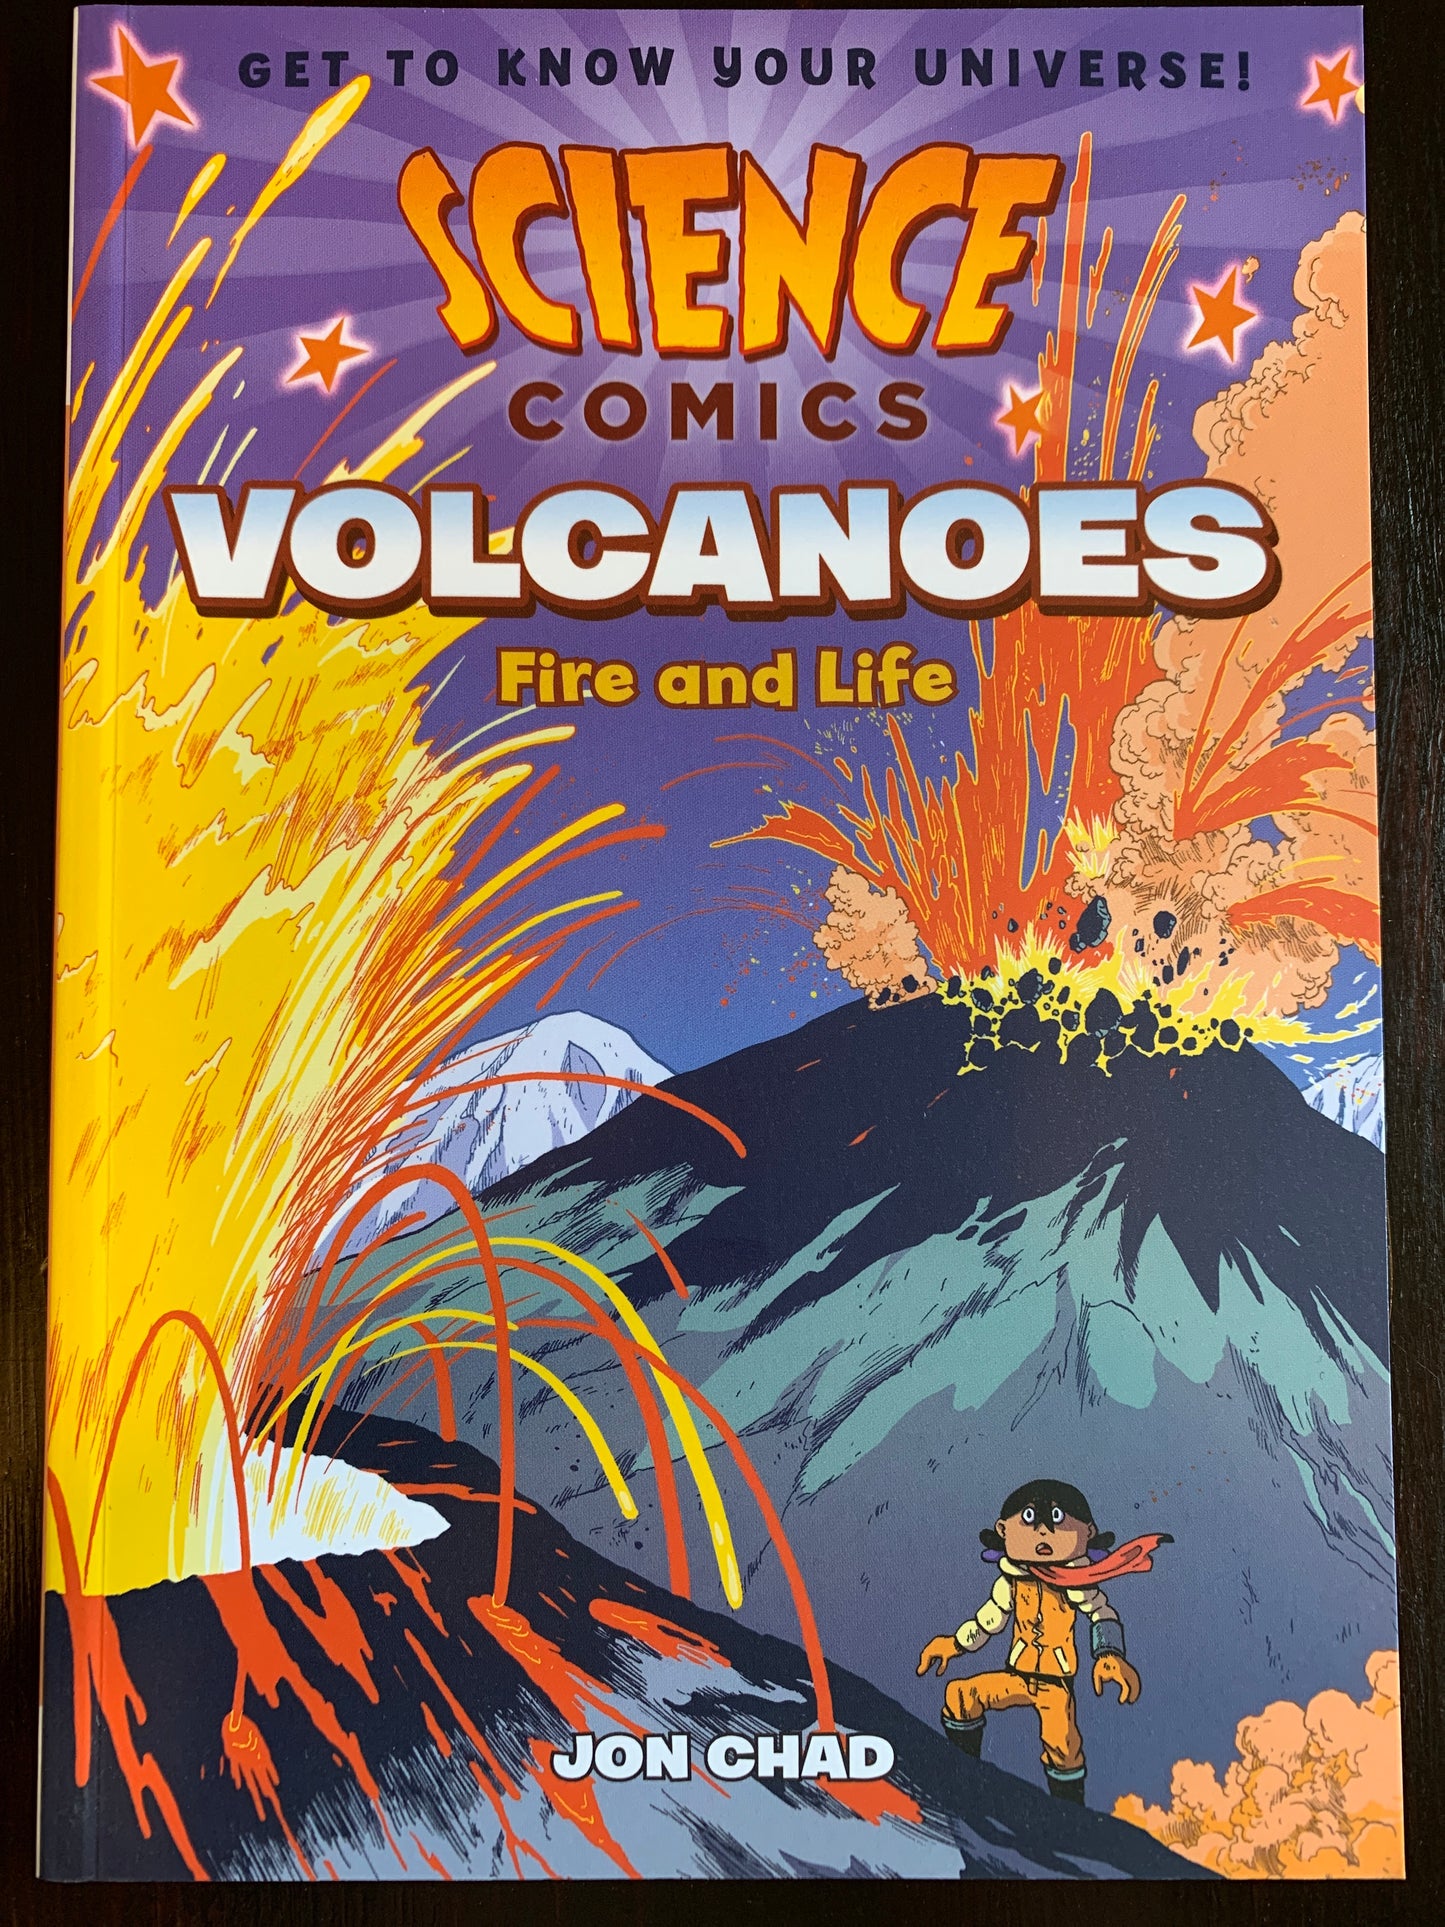 Science Comics: Volcanoes, Fire and Life